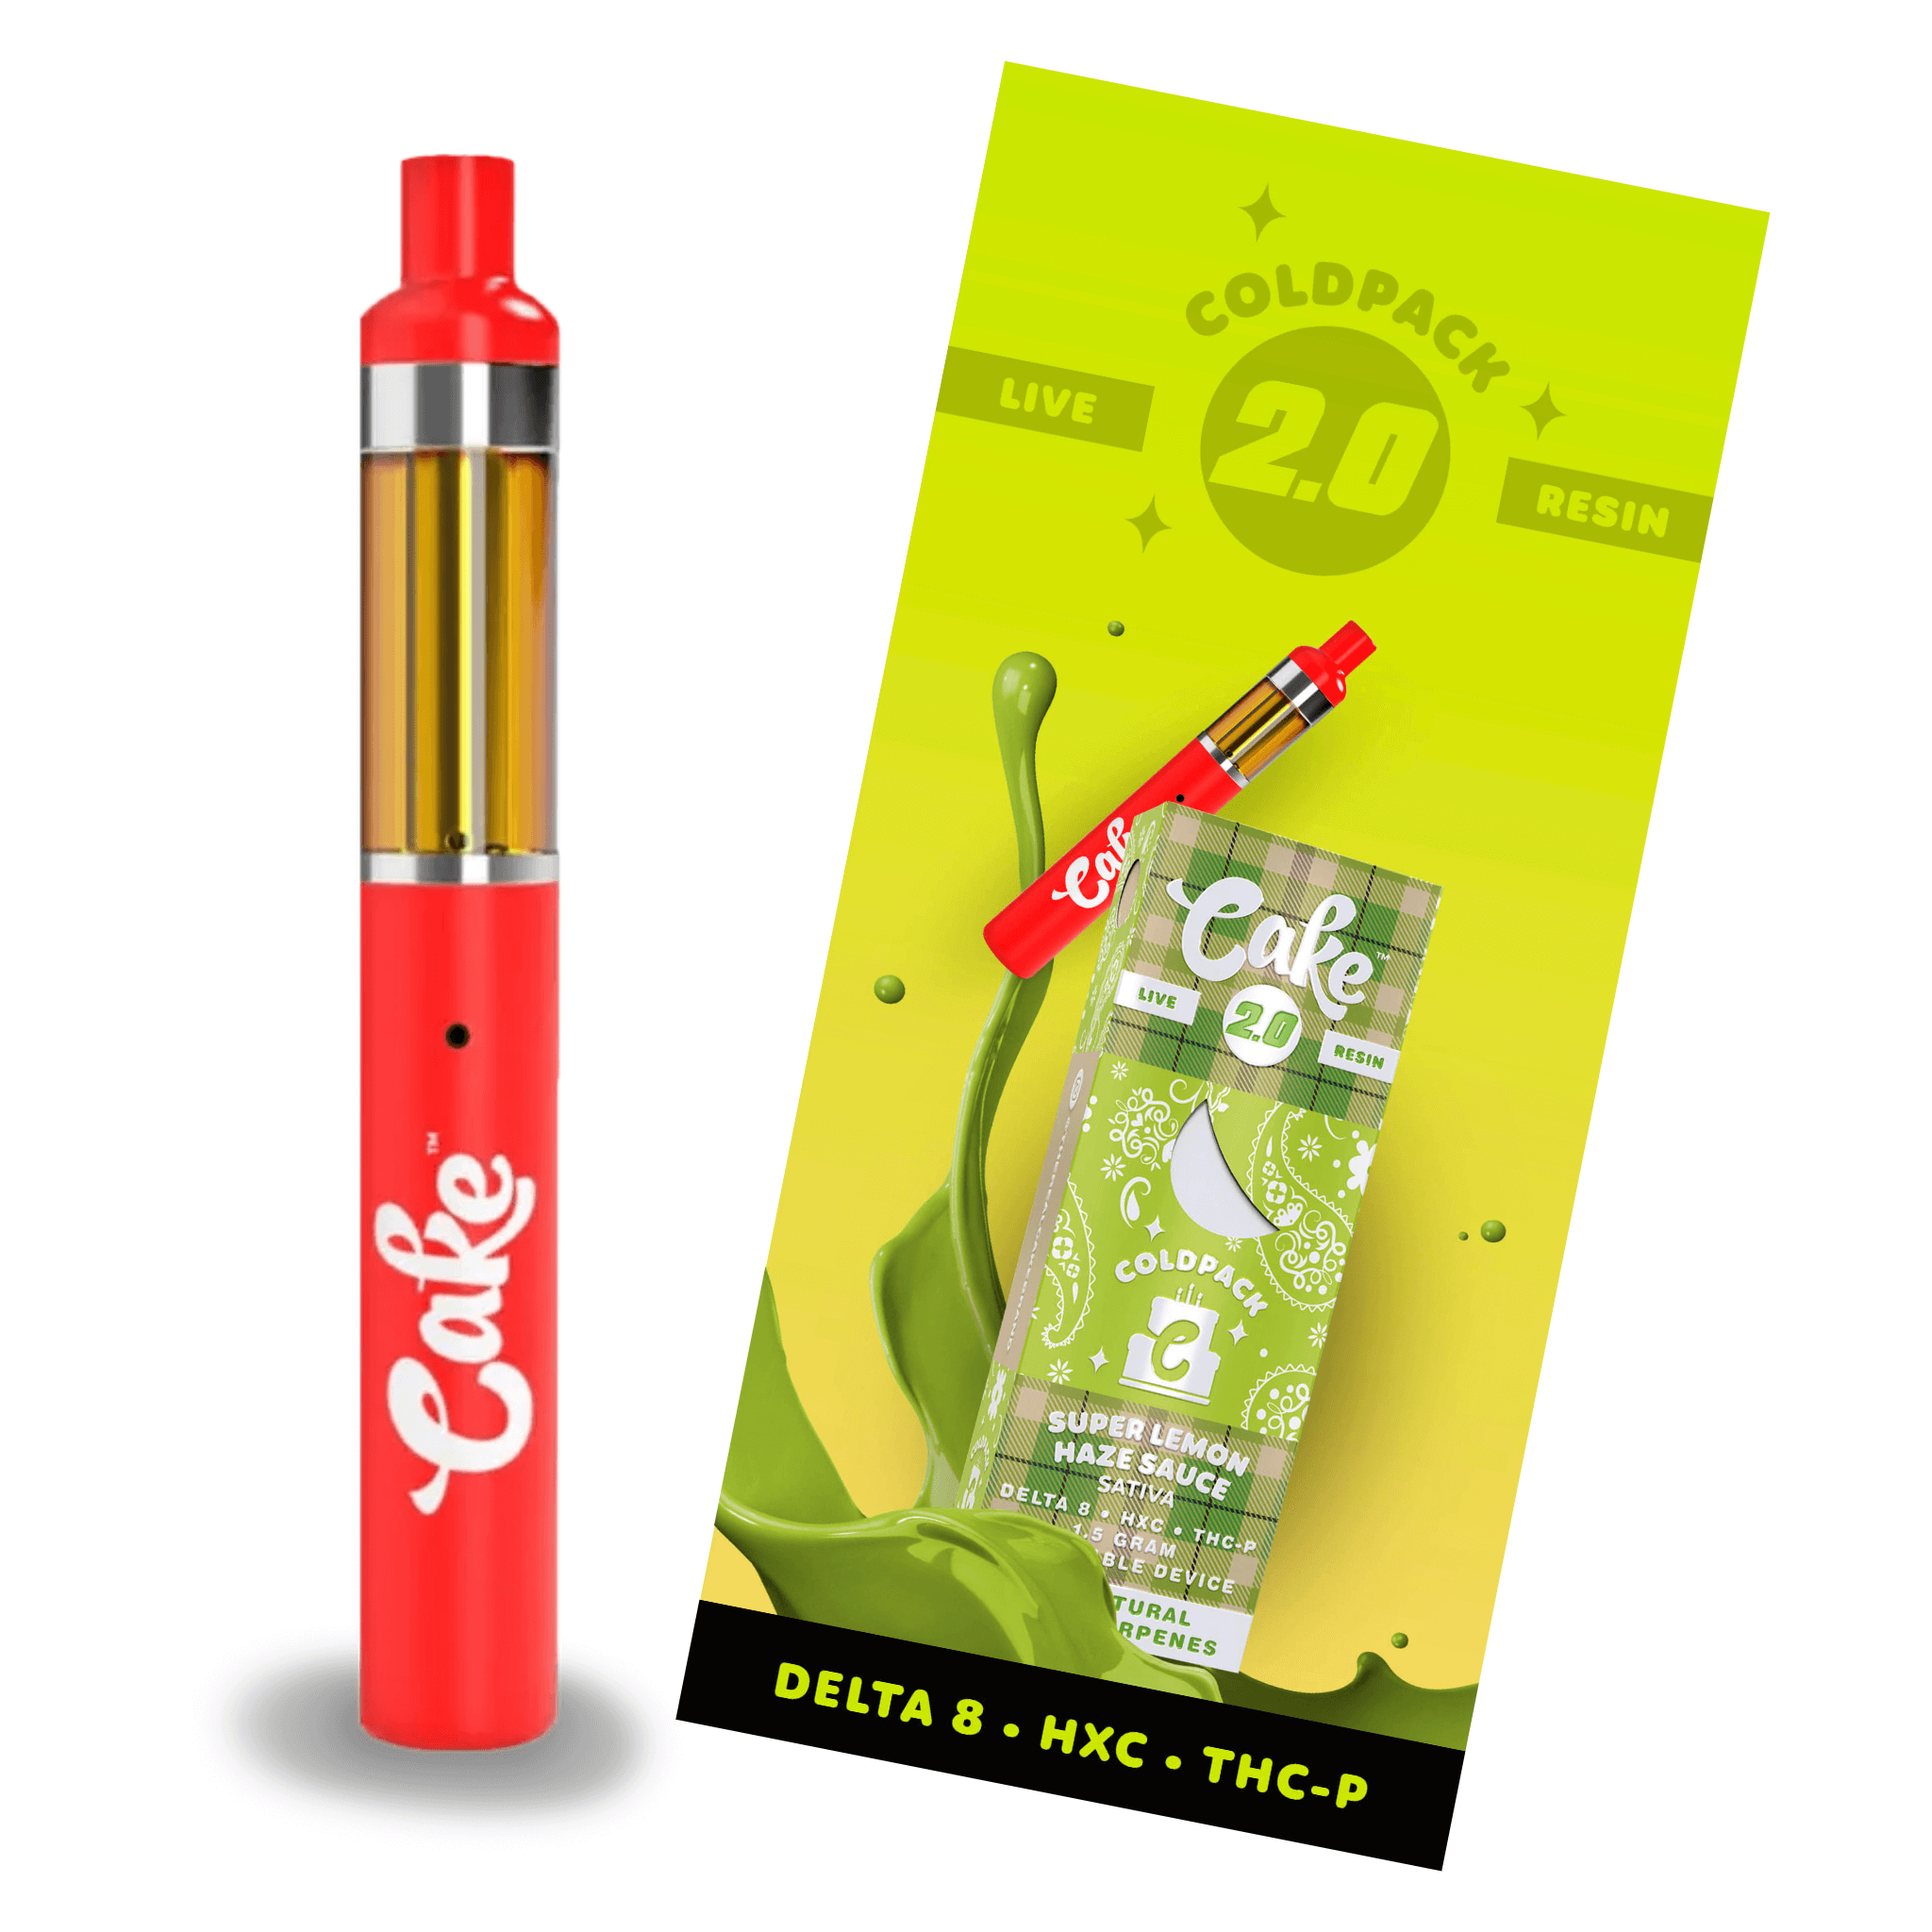 CAKE Disposable Vape - COLDPACK